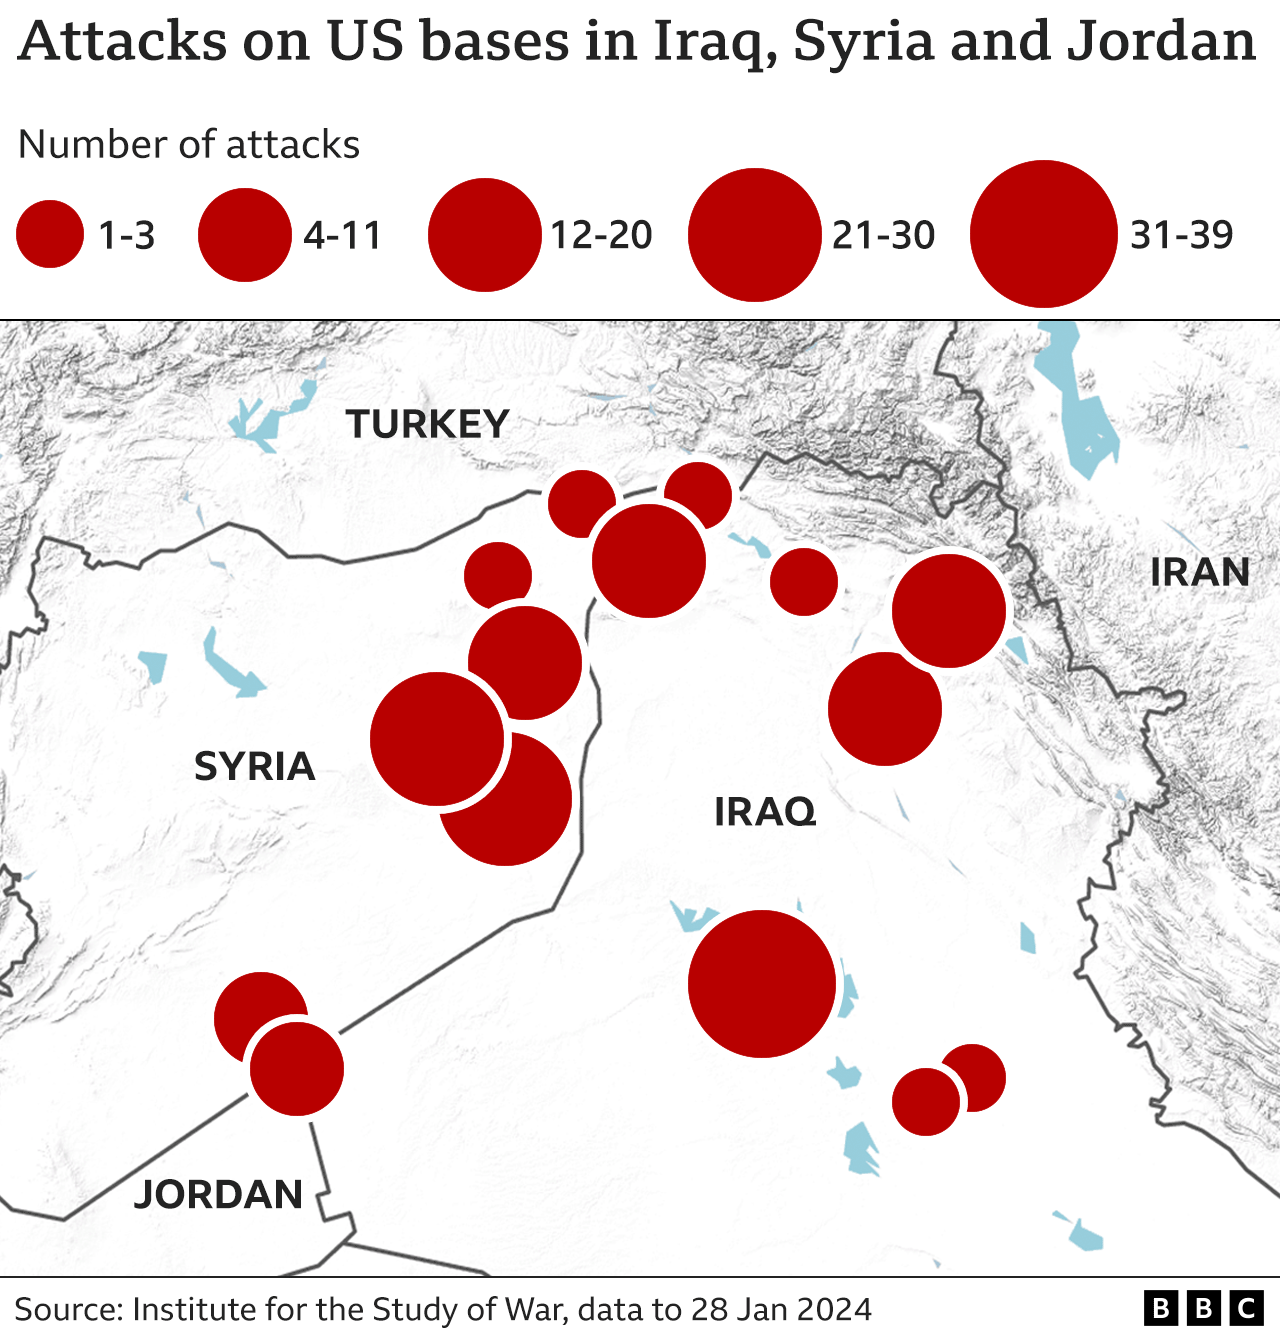 A map covering Syria, Iraq, Jordan, and Turkey, with attacks on US bases marked with red circles. Most are in Syria and Iraq